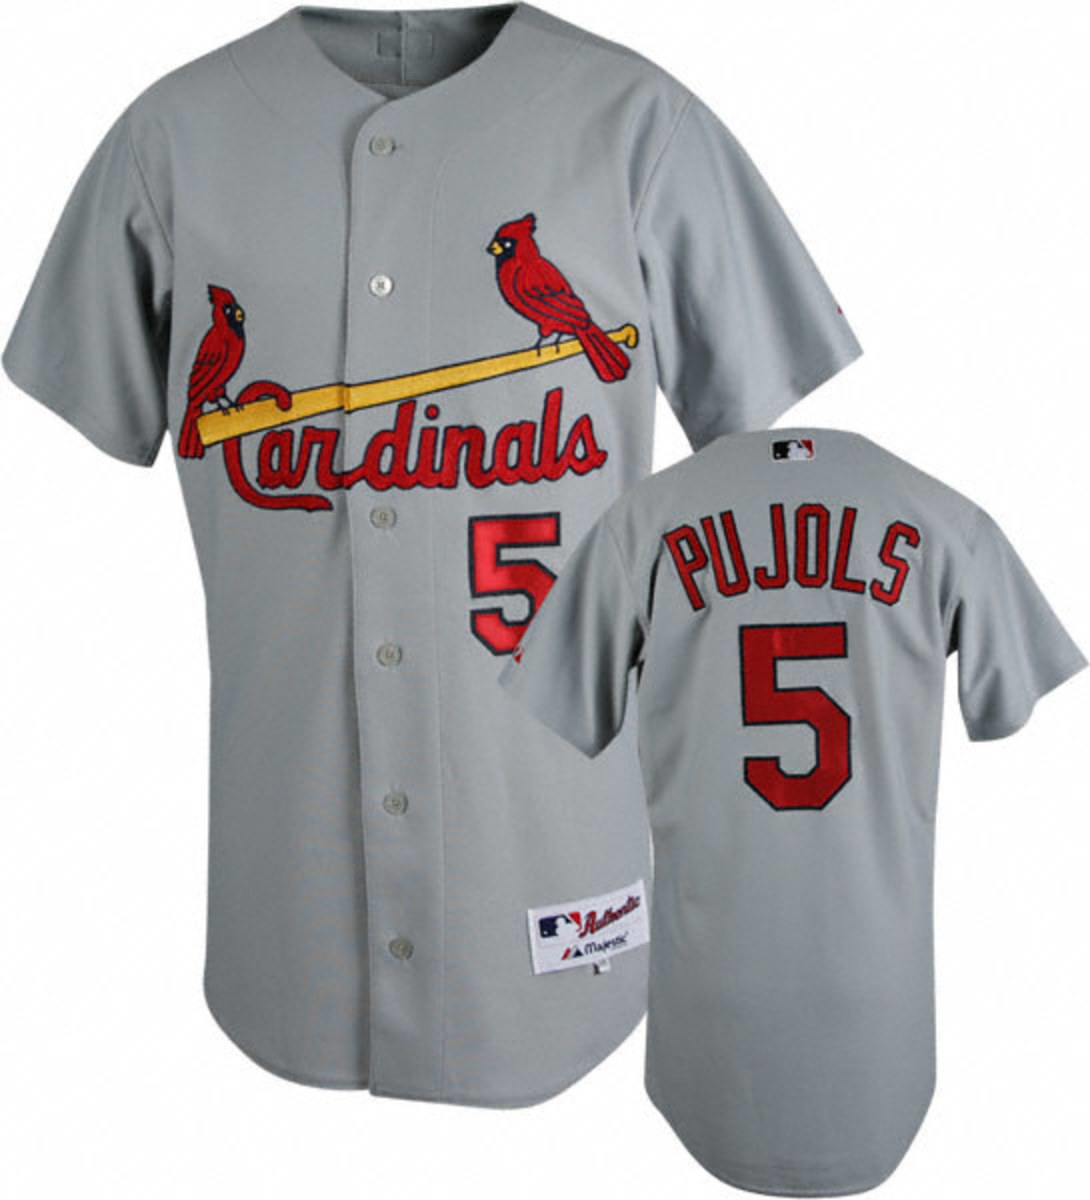 where to buy cheap authentic mlb jerseys